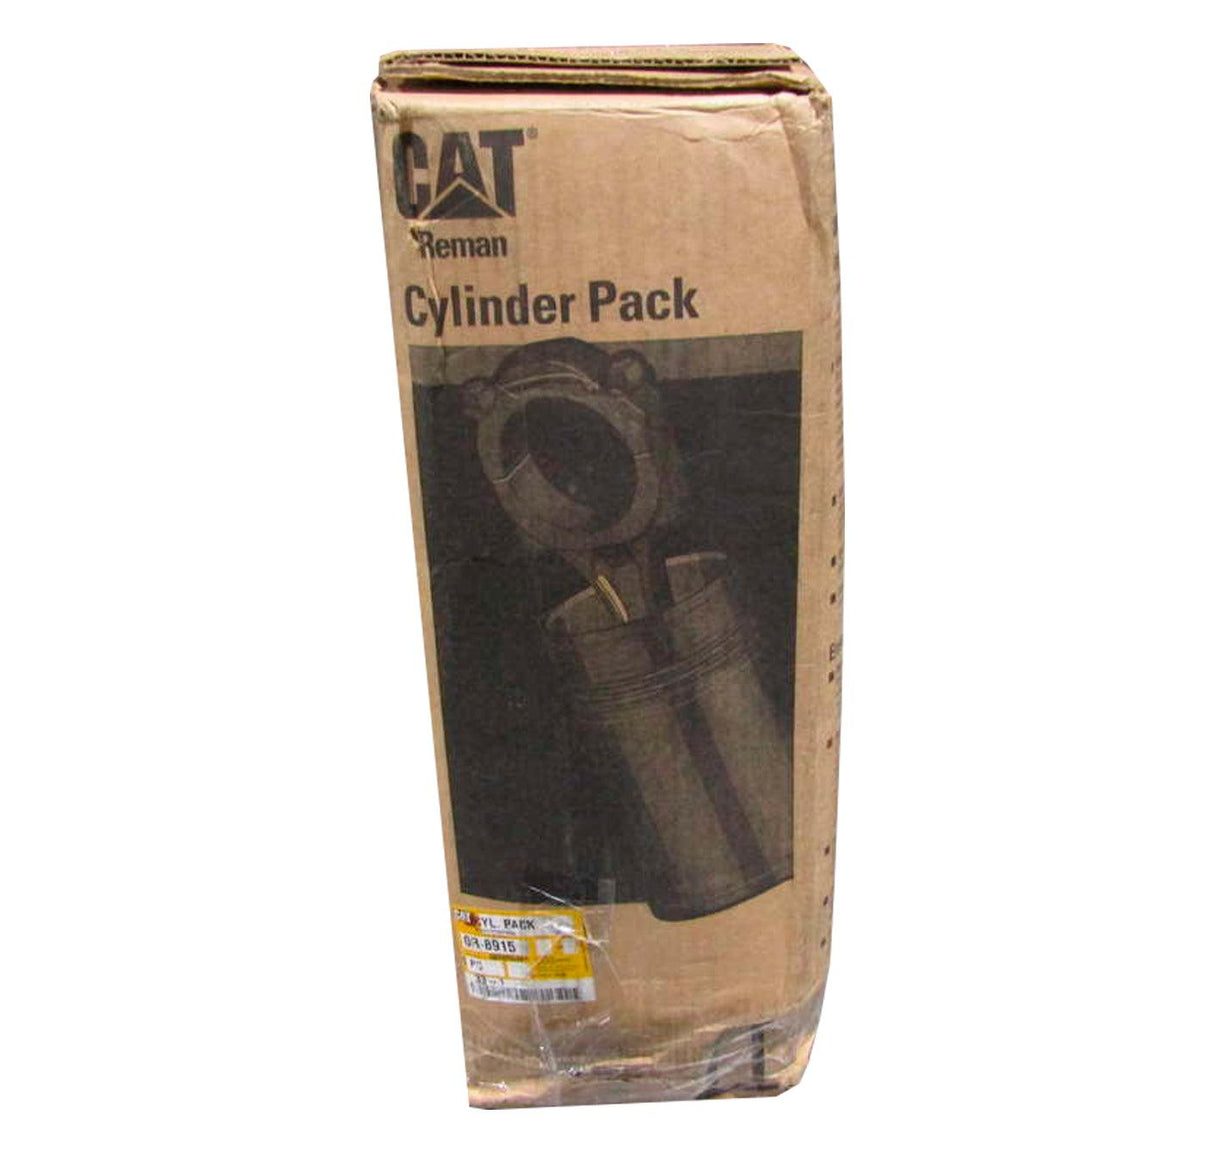 0R-8915 Genuine CAT Cylinder Pack - Truck To Trailer